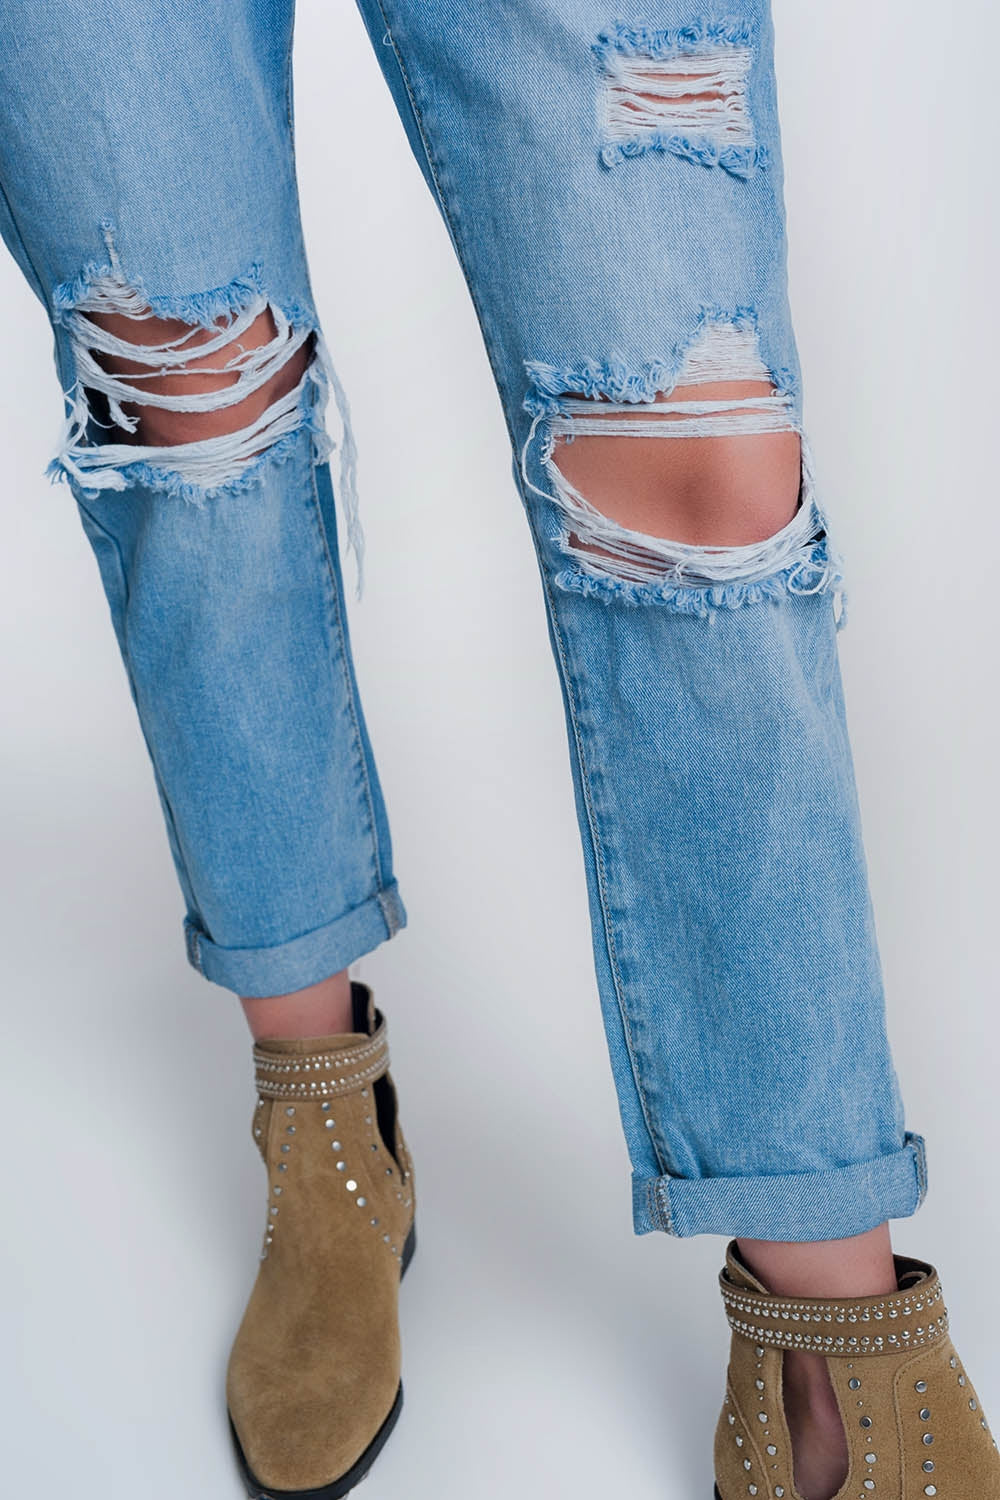 high waist mom jeans with button frontJeans